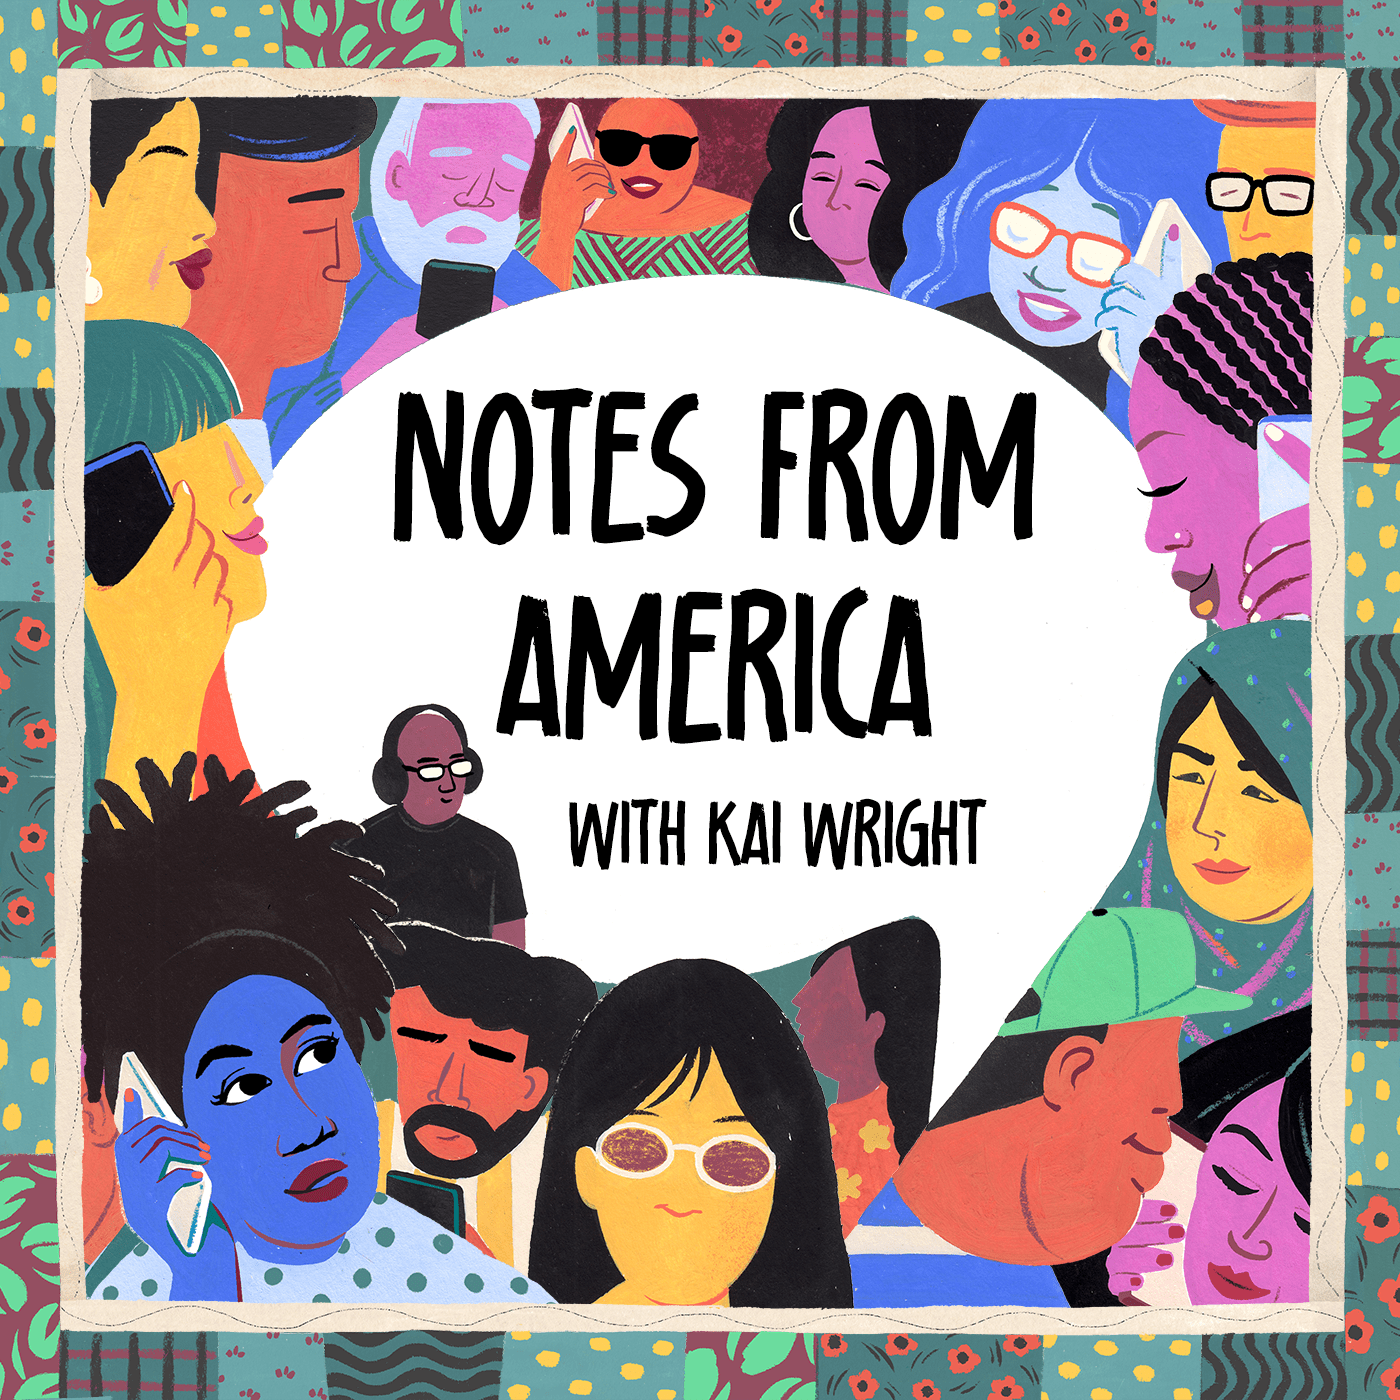 Notes from America with Kai Wright podcast show image